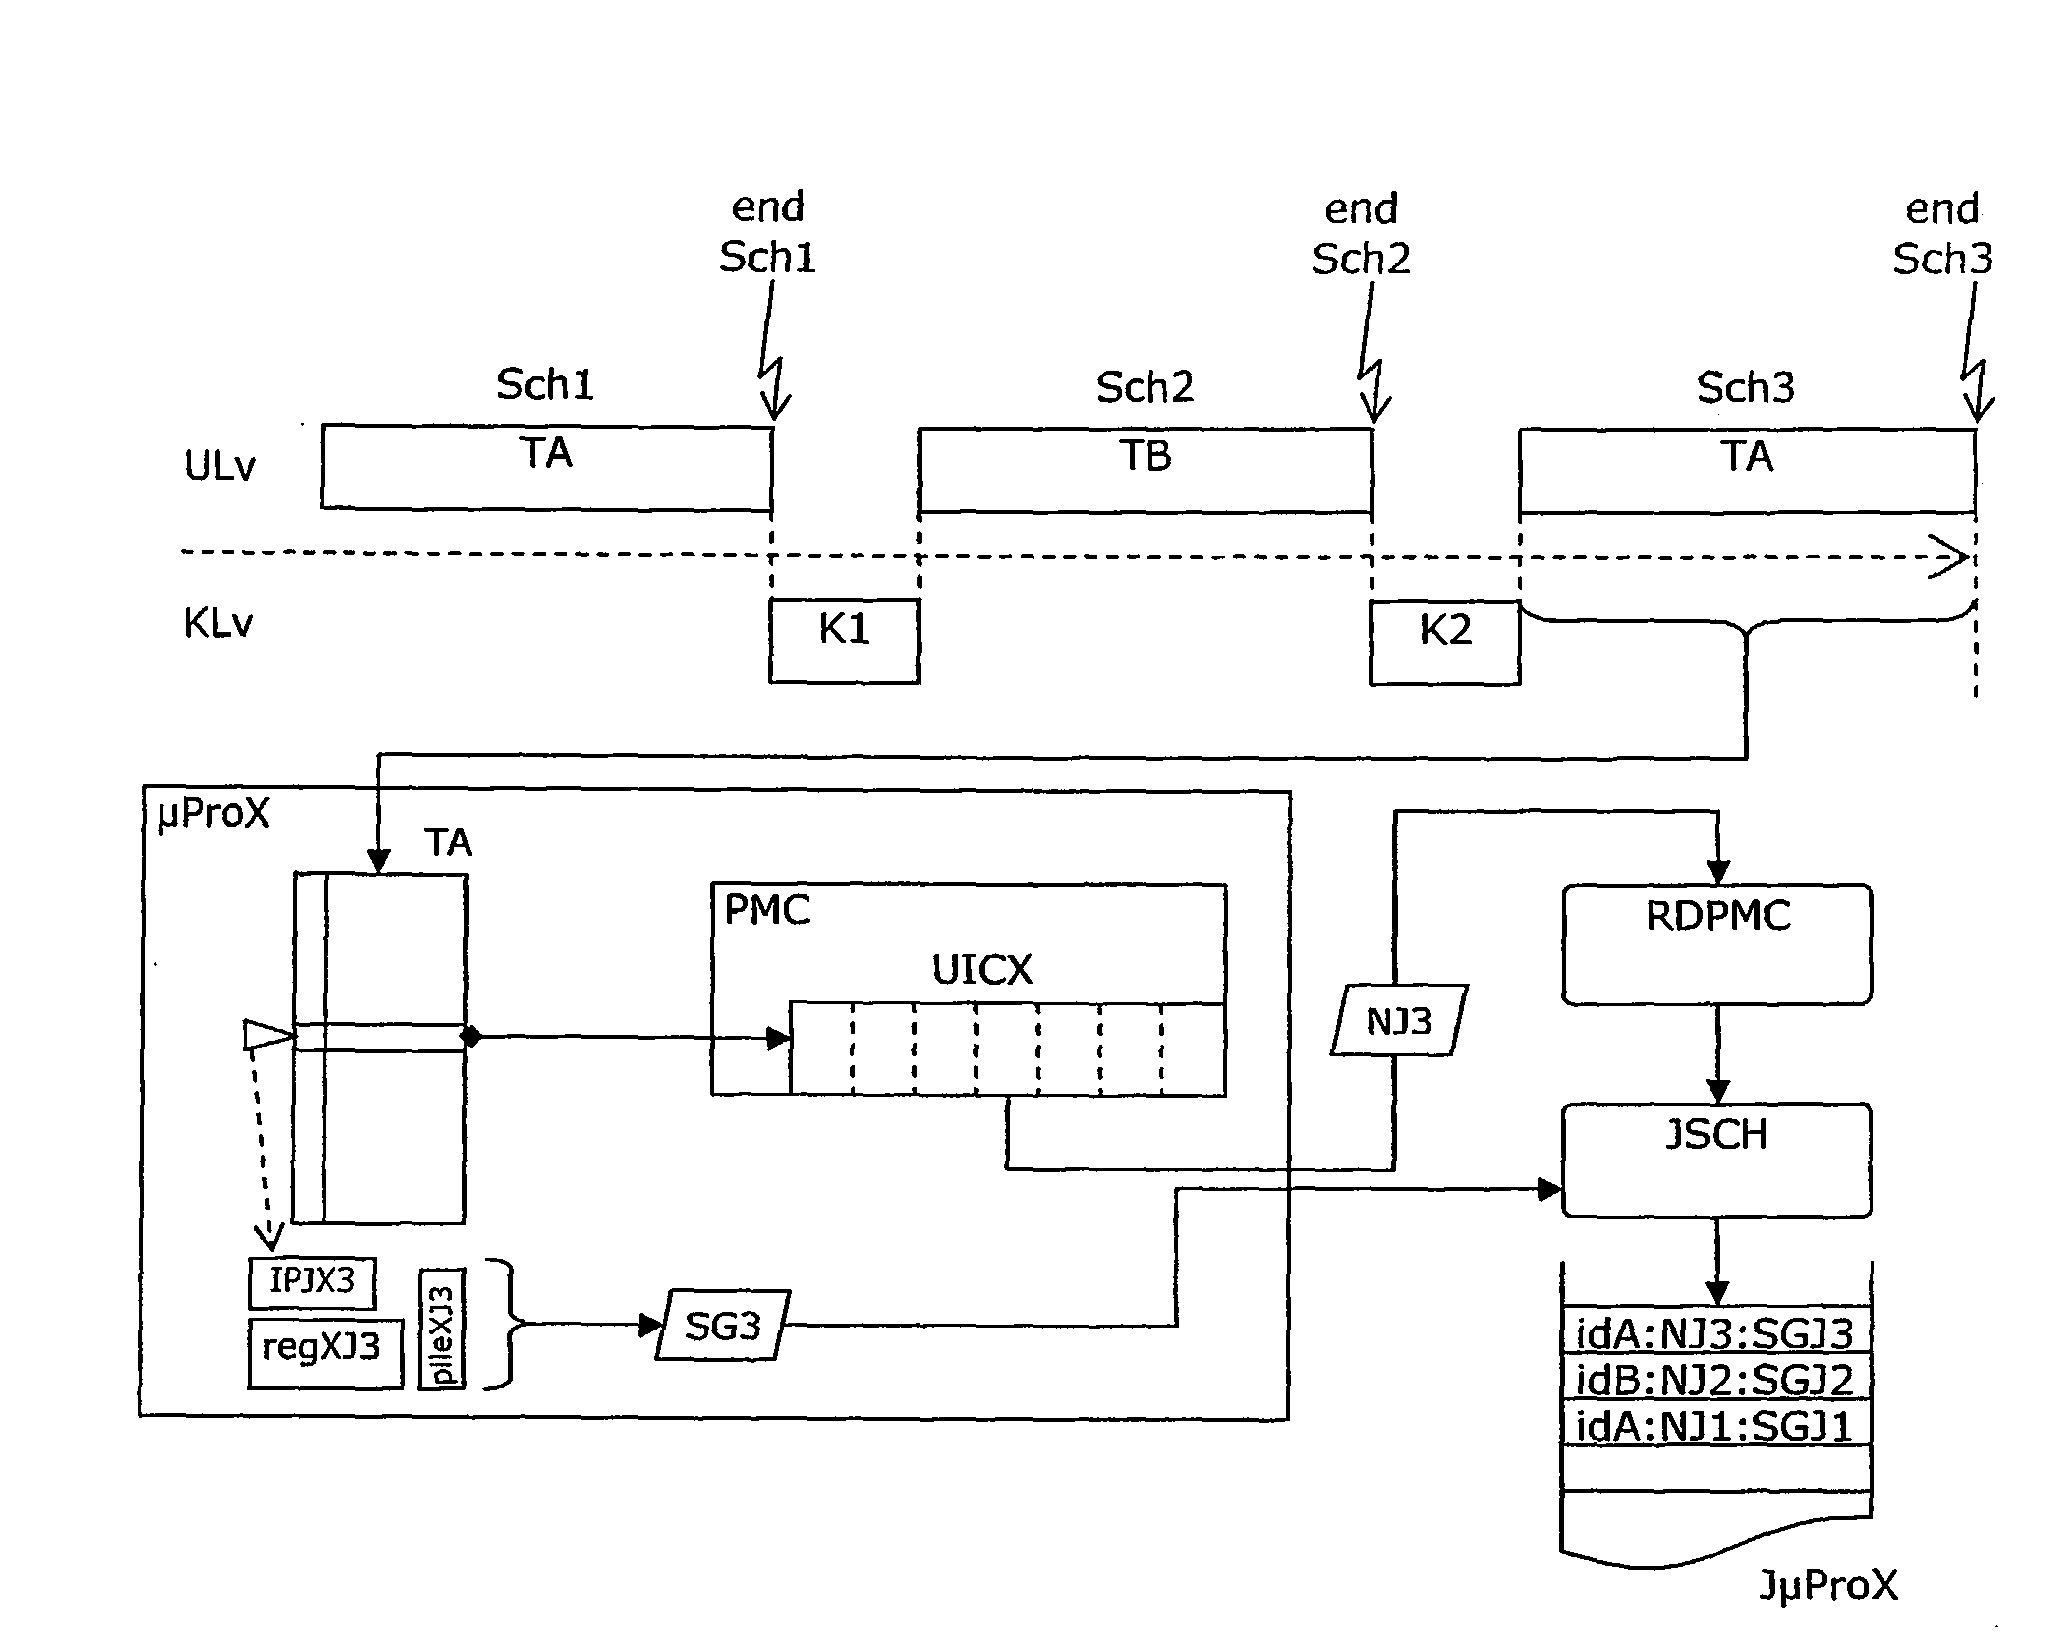 Method for Optimising the Logging and Replay of Mulit-Task Applications in a Mono-Processor or Multi-Processor Computer System